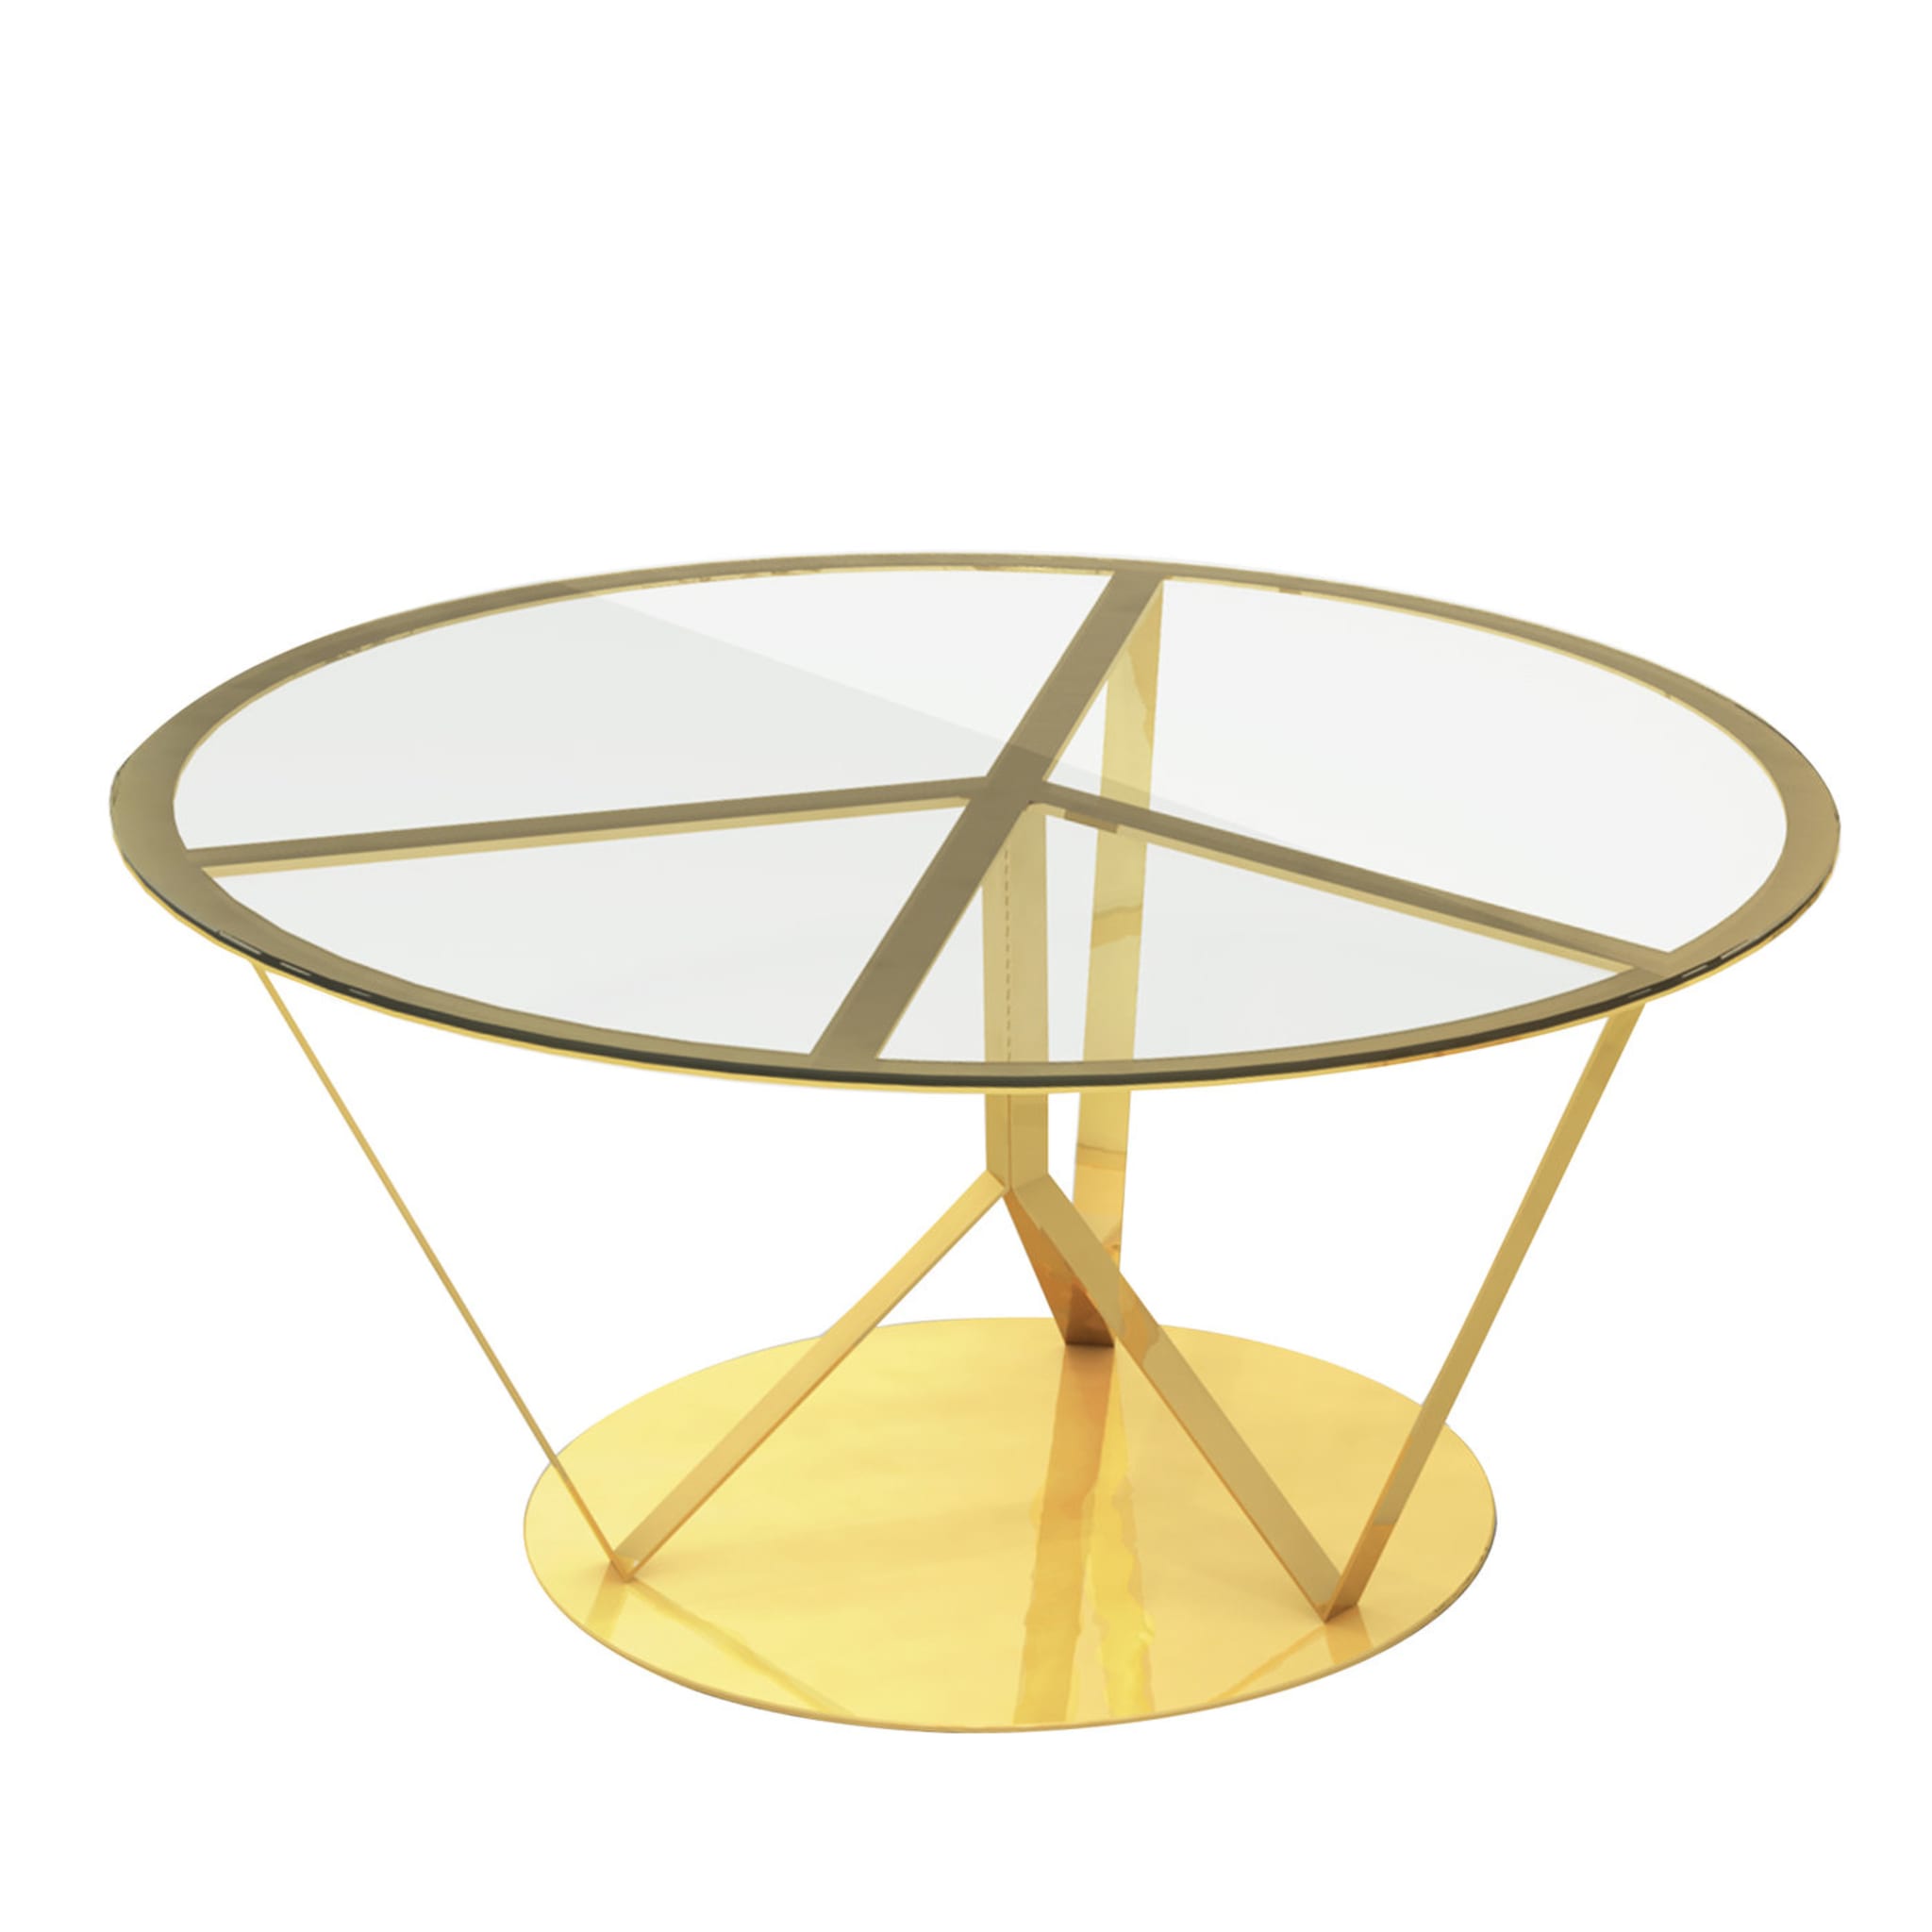 Pace Gold Table by Garilab by Piter Perbellini - Main view